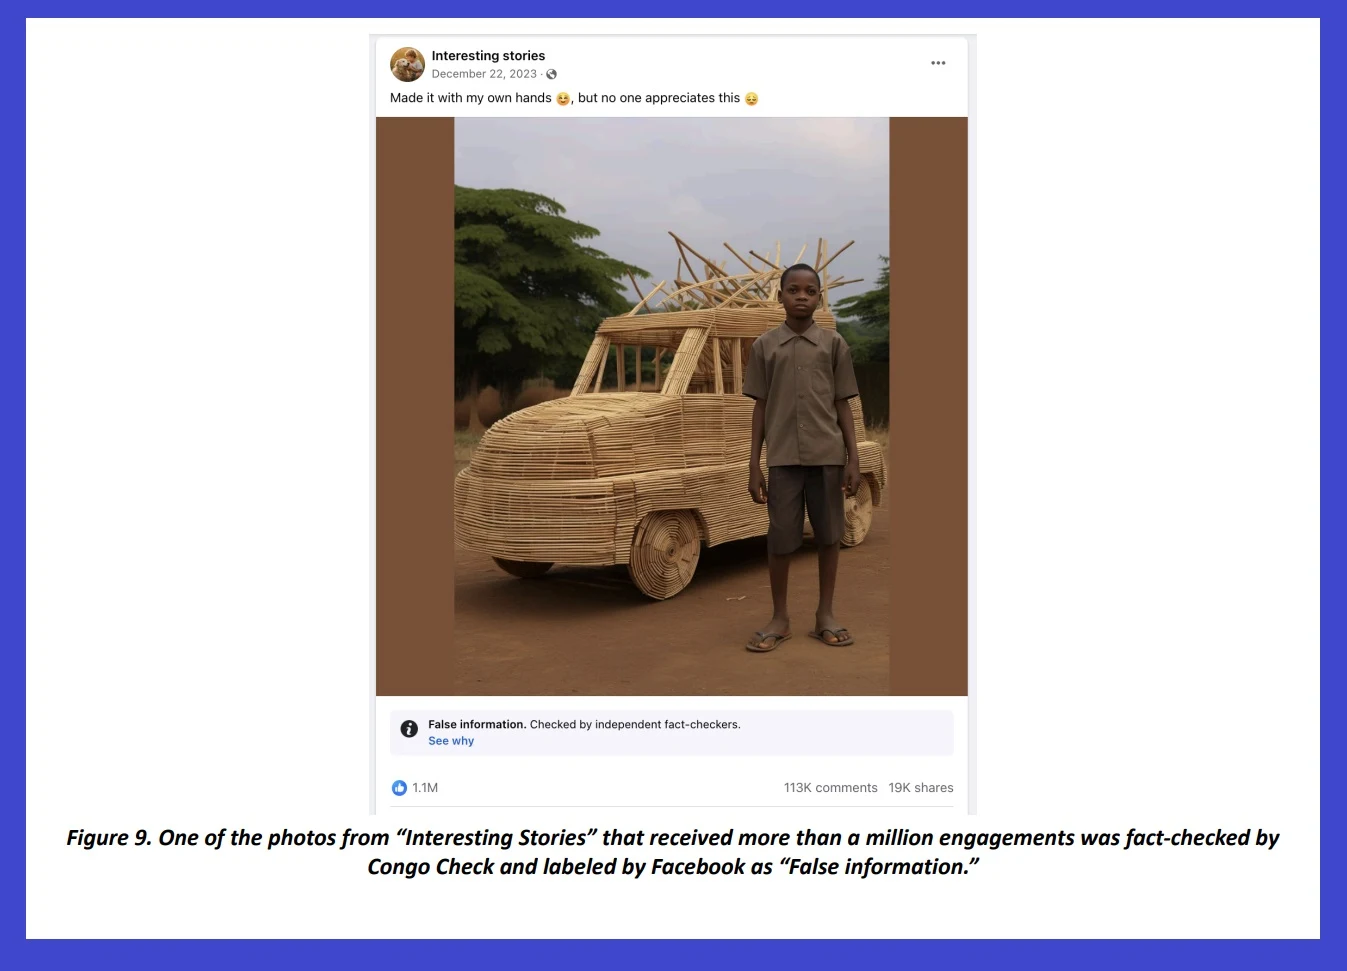 Users baffled by bizarre AI-generated images on Facebook, questioning platform's direction and content moderation.